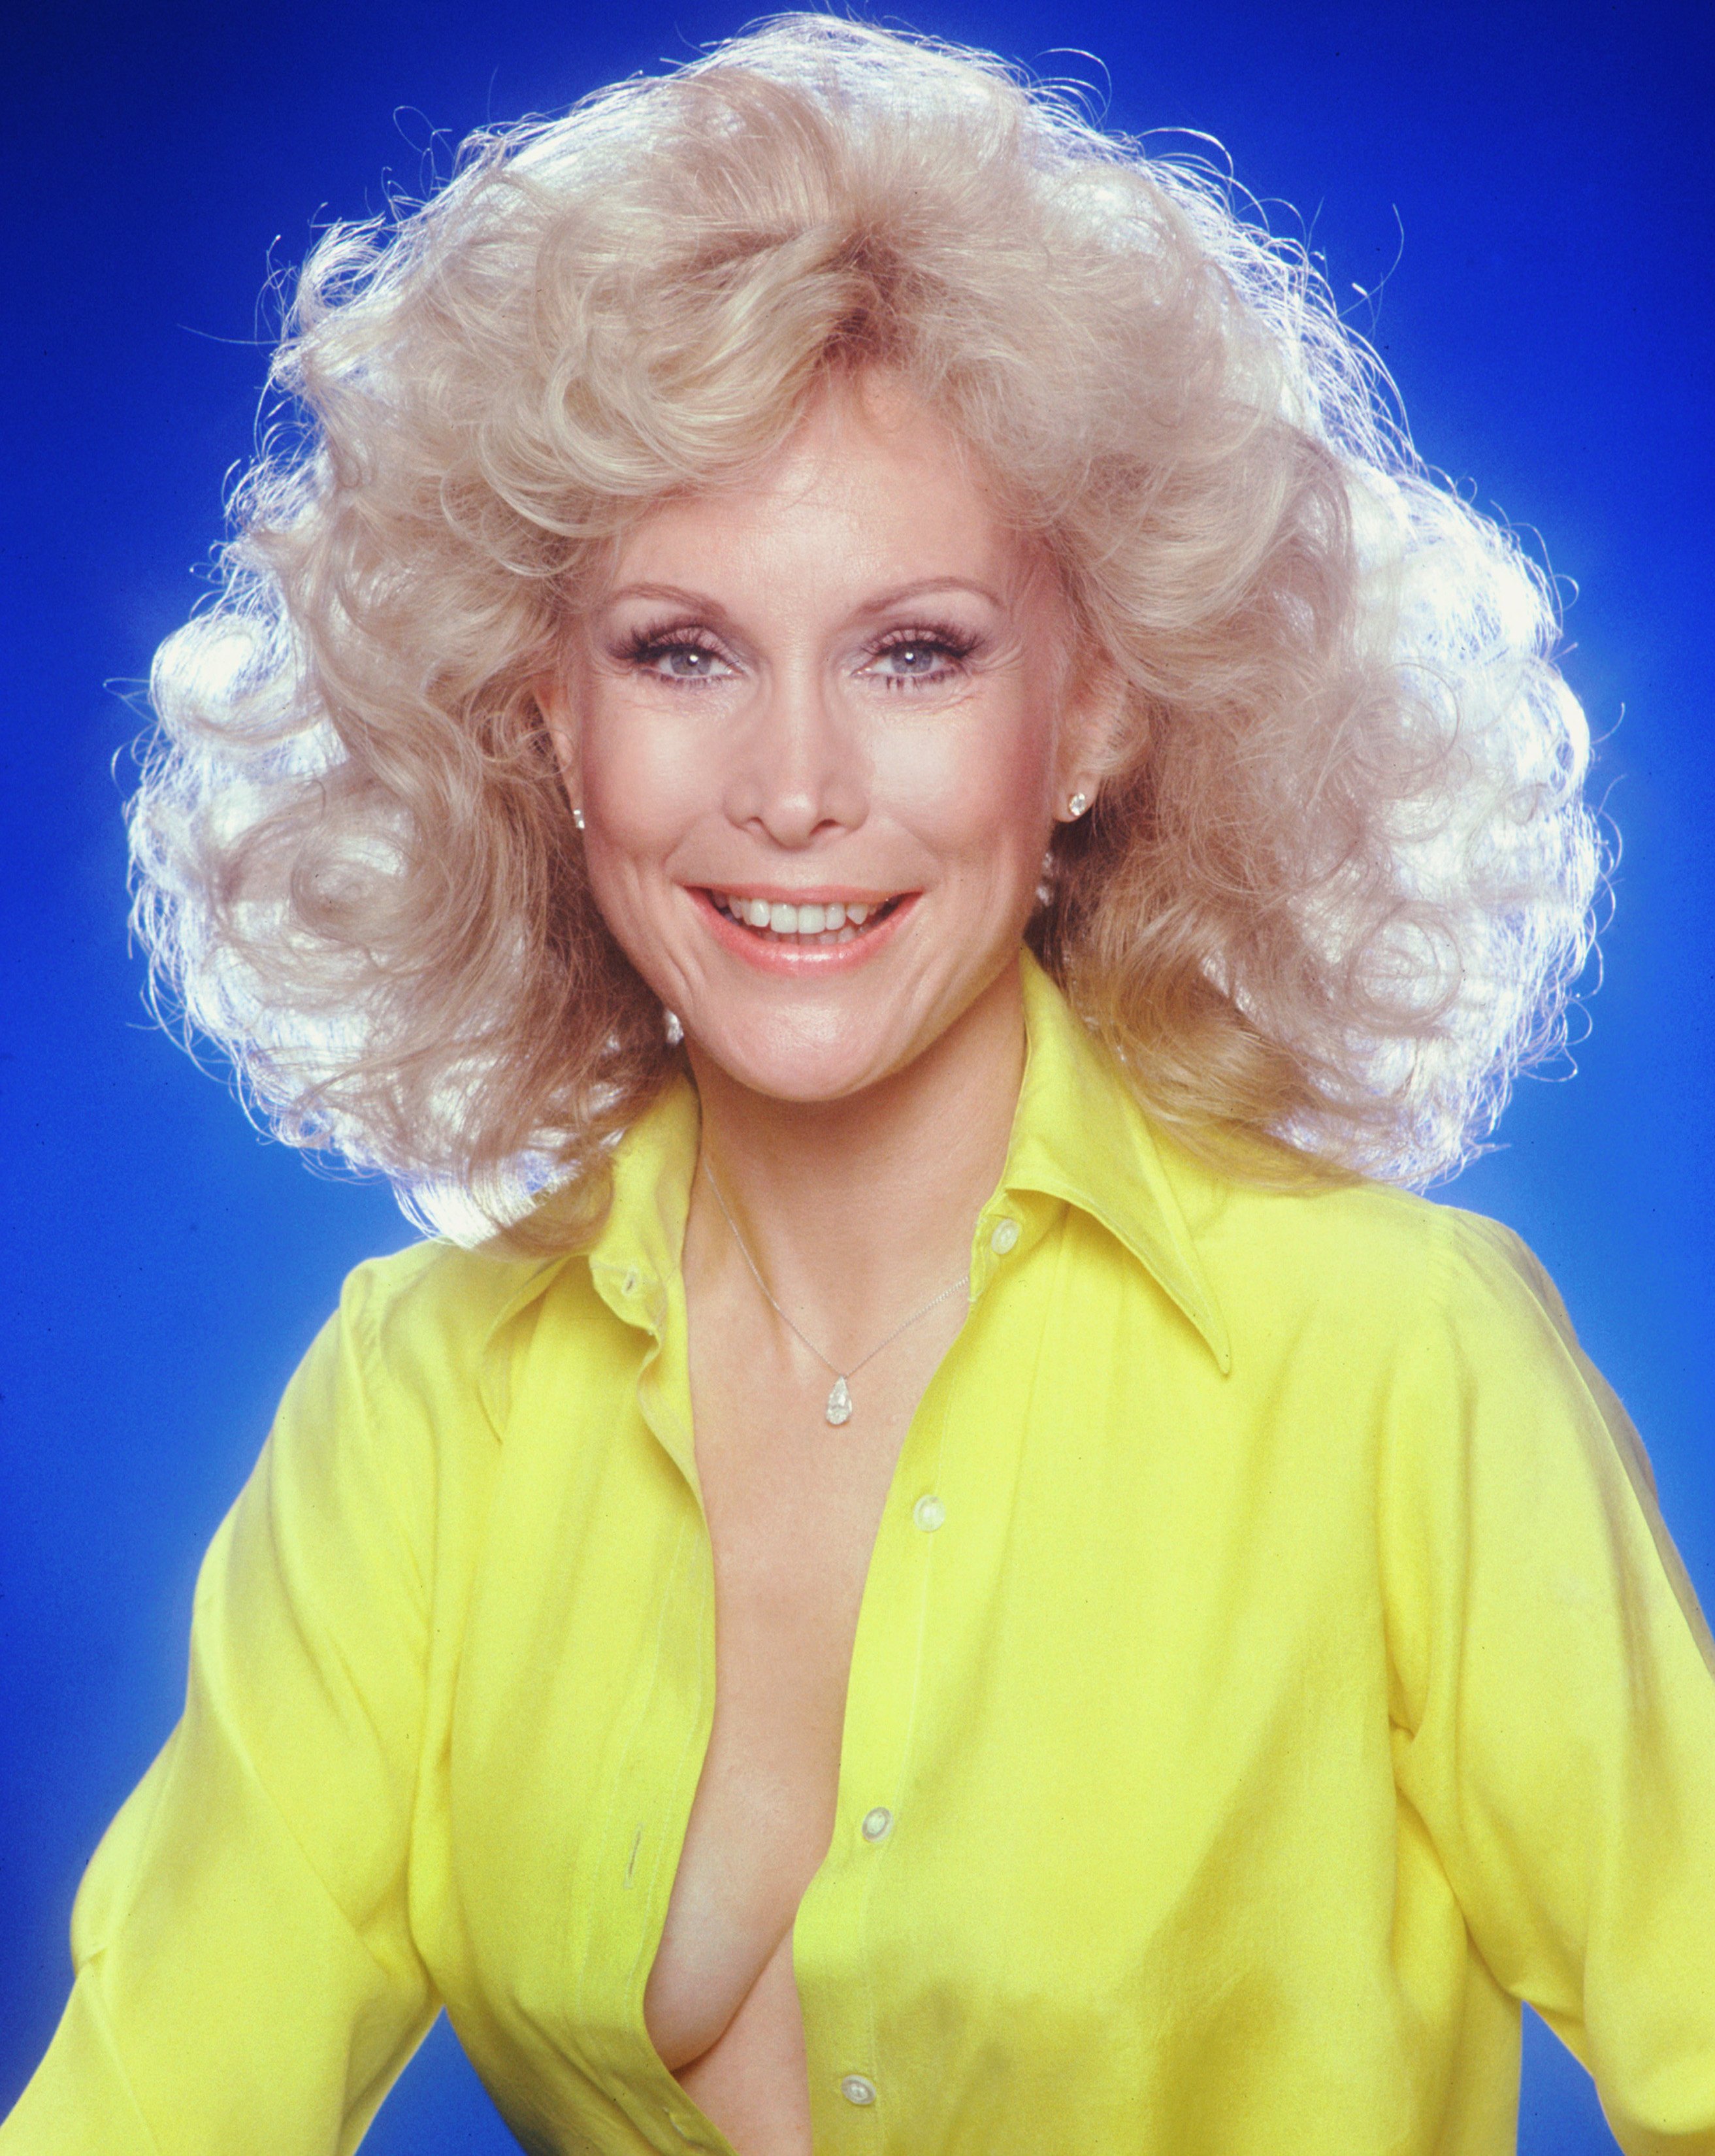 Barbara Eden poses in a yellow shirt in 1990 in Los Angeles, California. | Source: Getty Images